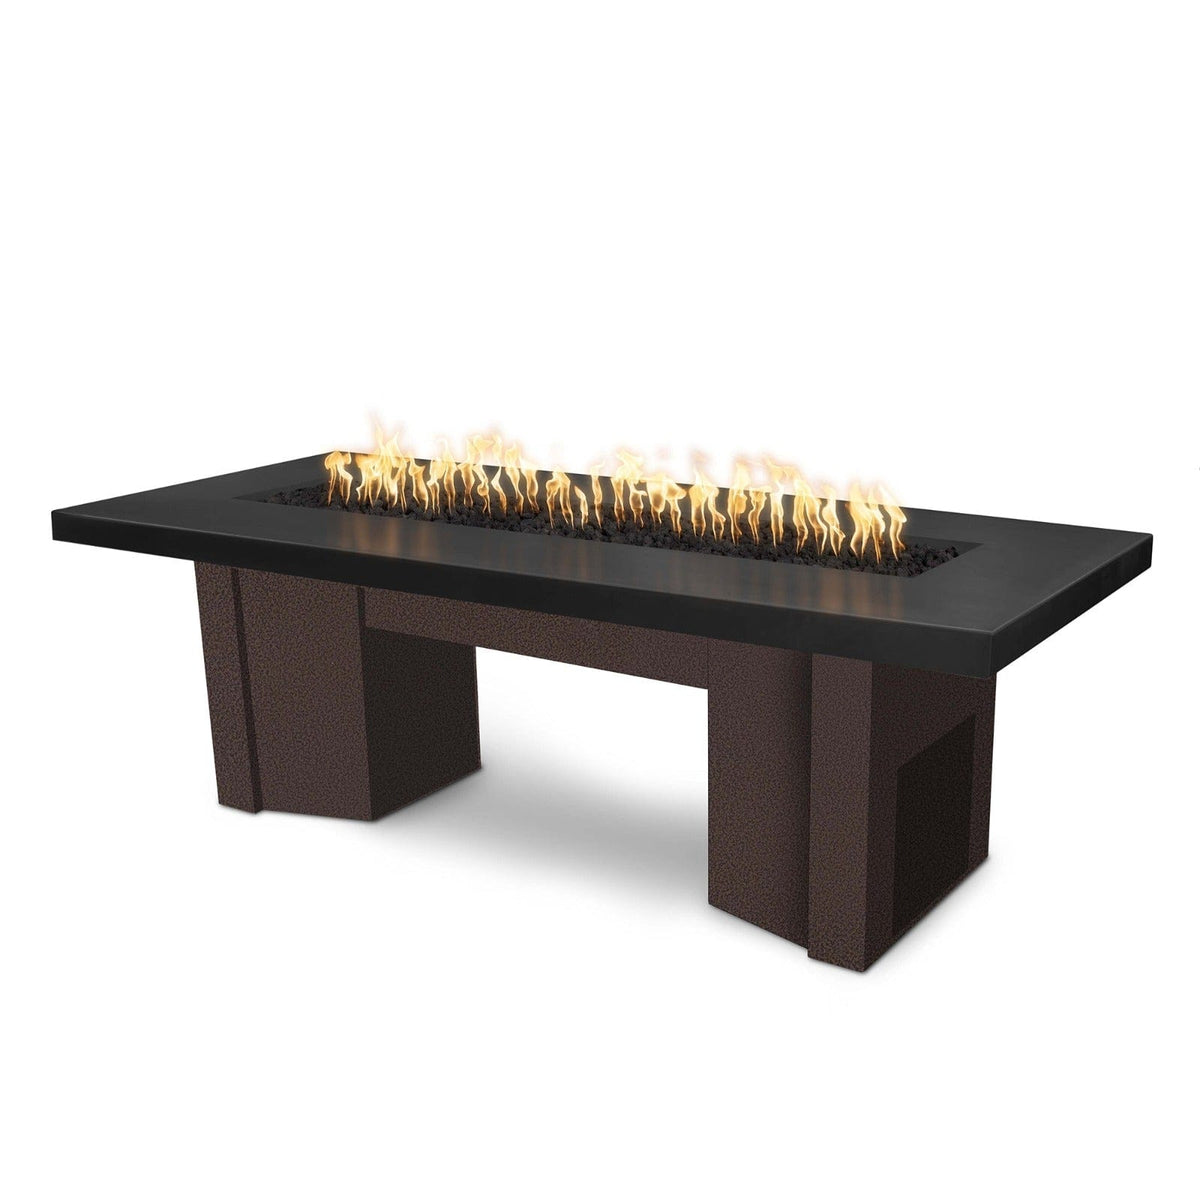 The Outdoor Plus Fire Features Black (-BLK) / Copper Vein Powder Coated Steel (-CPV) The Outdoor Plus 60&quot; Alameda Fire Table Smooth Concrete in Natural Gas - Match Lit with Flame Sense System / OPT-ALMGFRC60FSML-NG